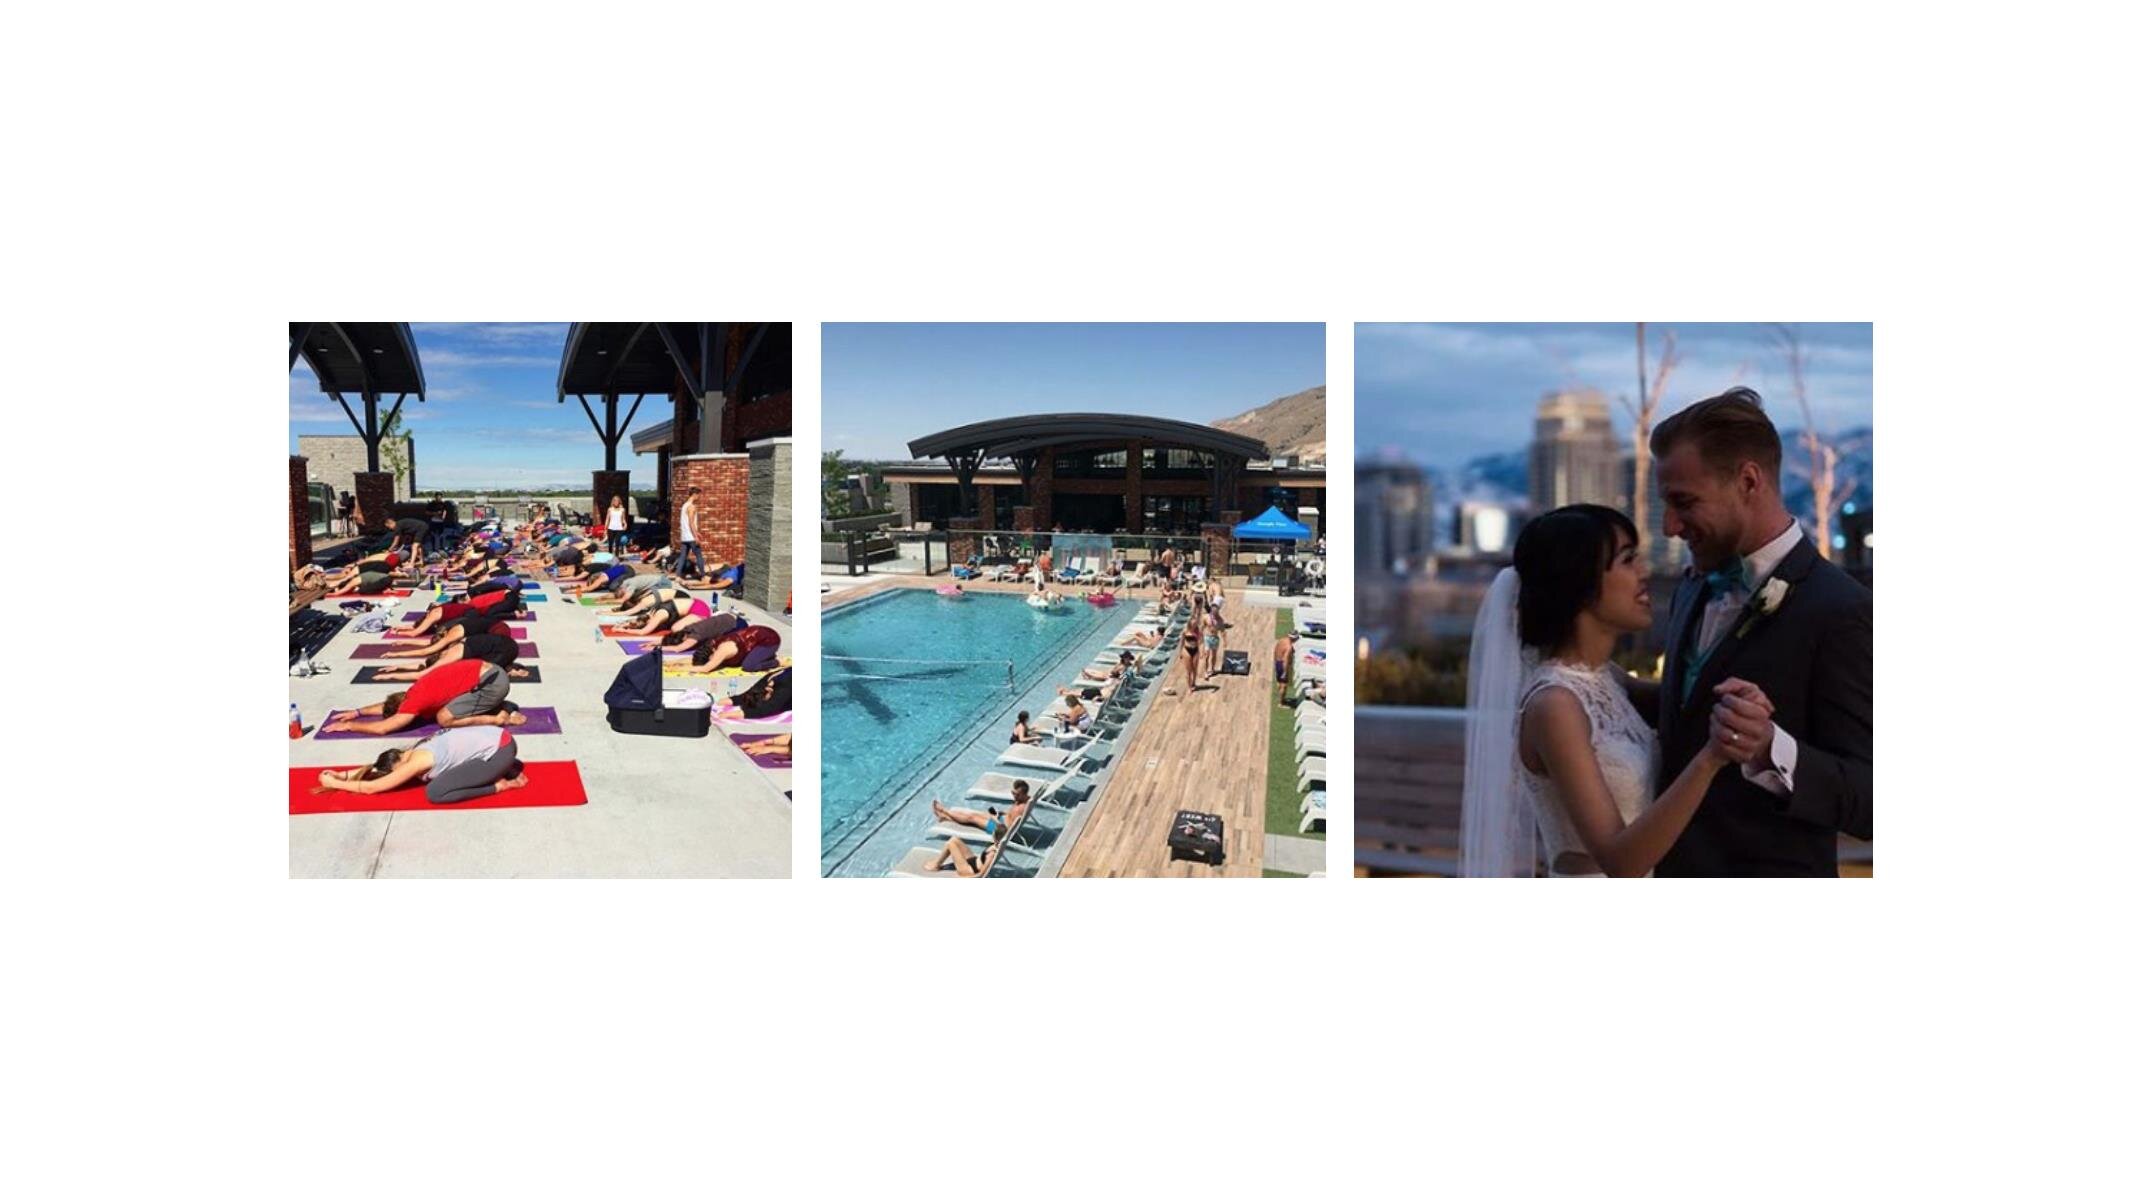  The Sky Lounge provides opportunities for a variety of social activities and memorable experiences including yoga, pool parties, weddings, and even watching the solar eclipse. 